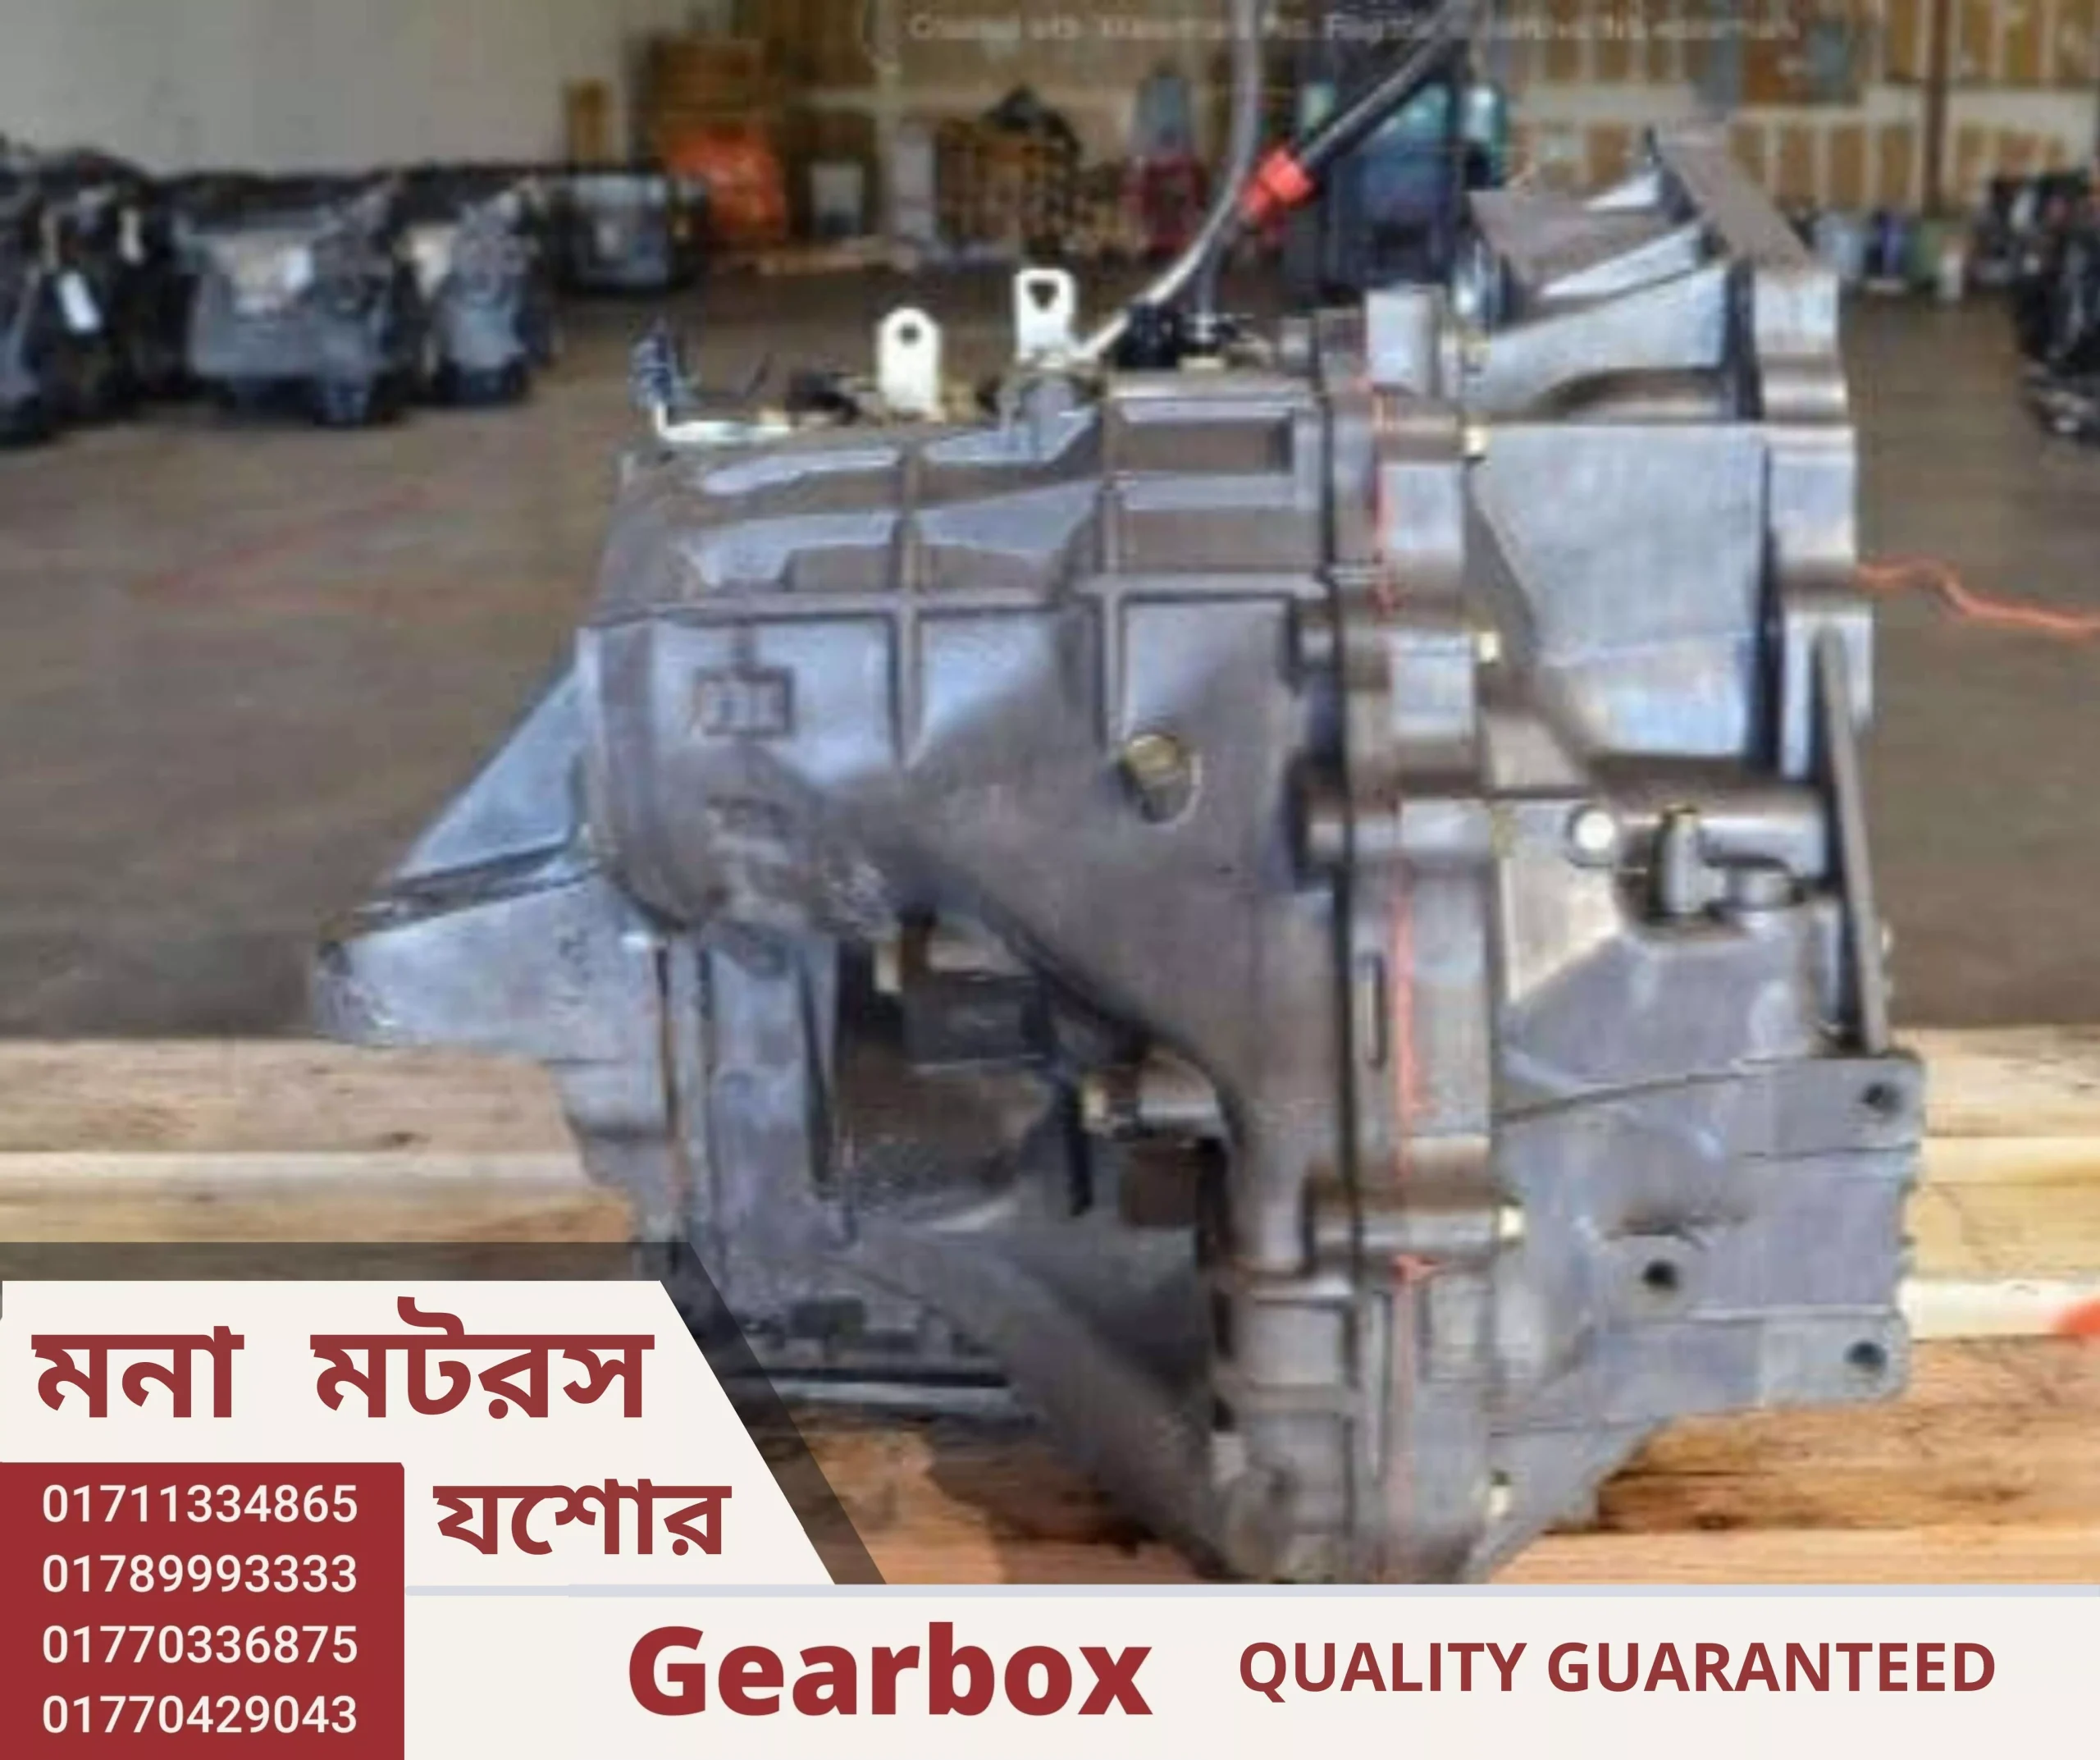 Gearbox 3 scaled